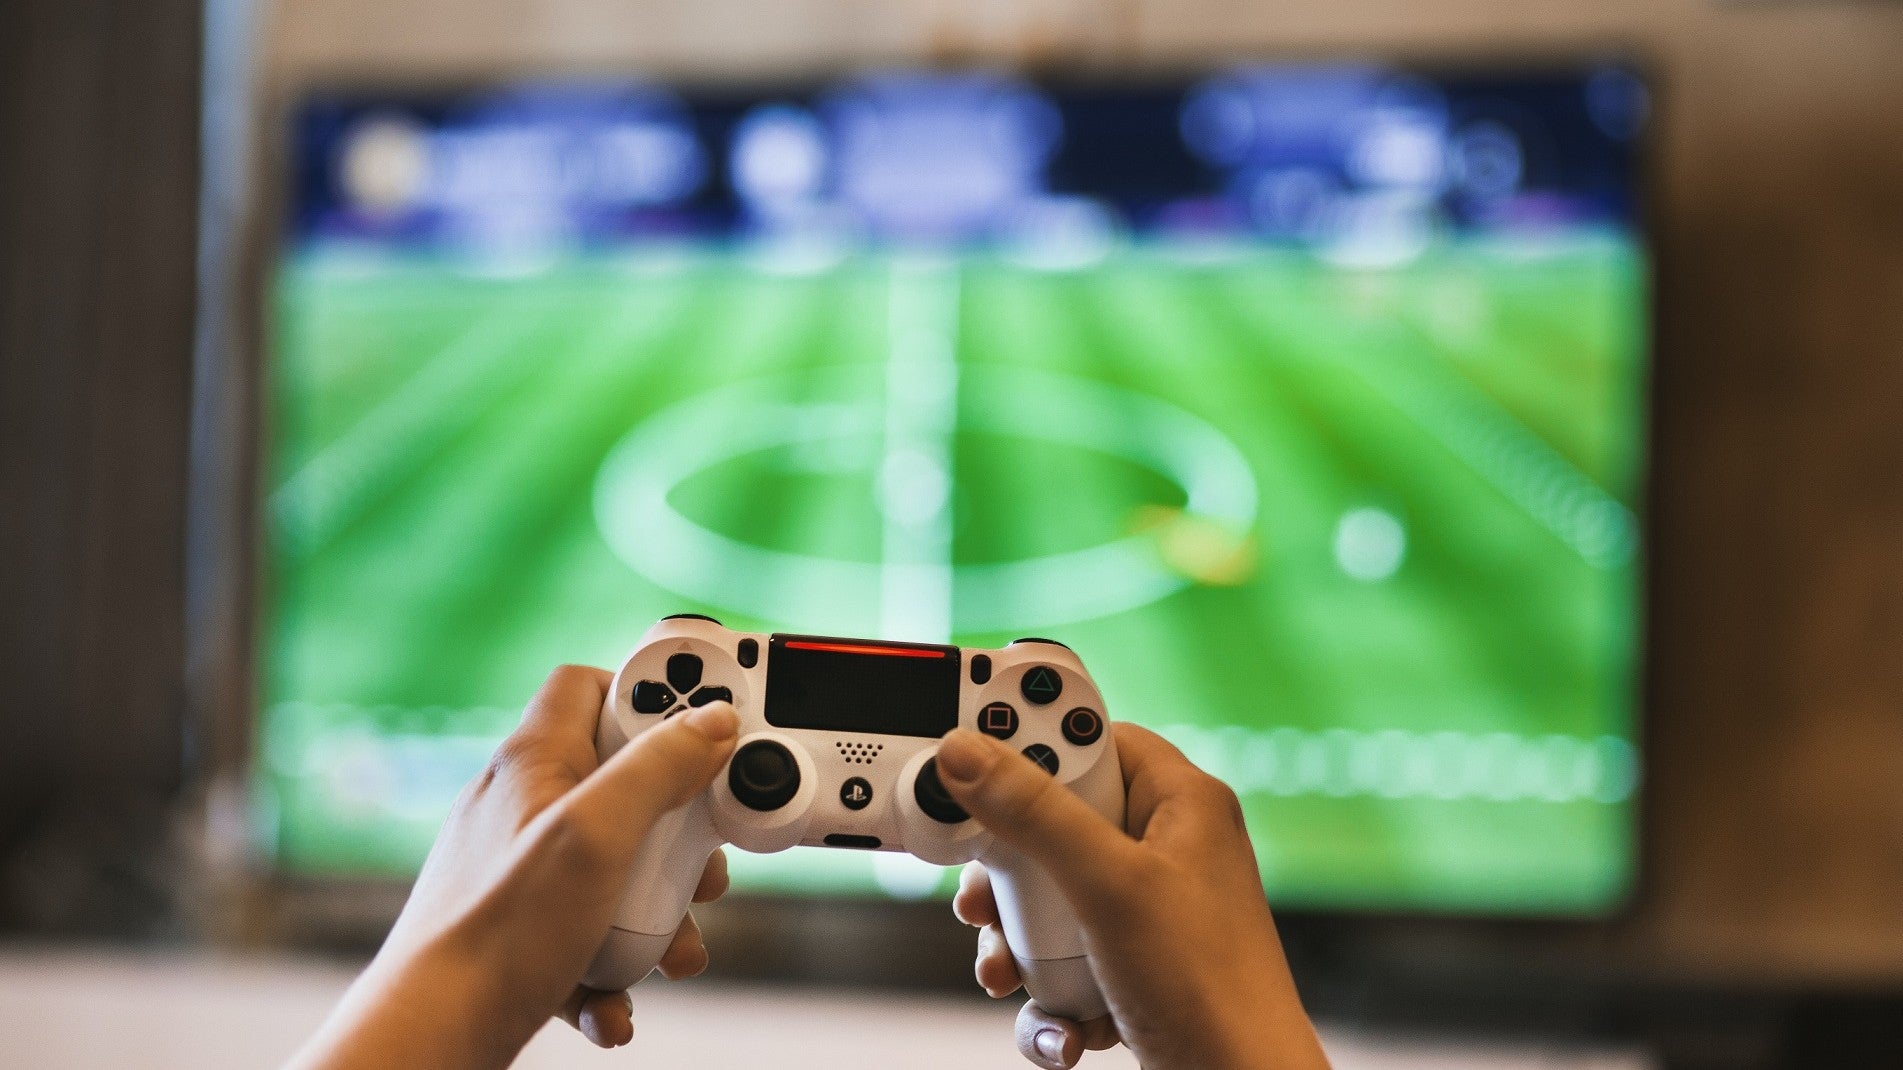 Hands holding a PS4 controller in the foreground, an out of focus screen with a soccer game on it in the background